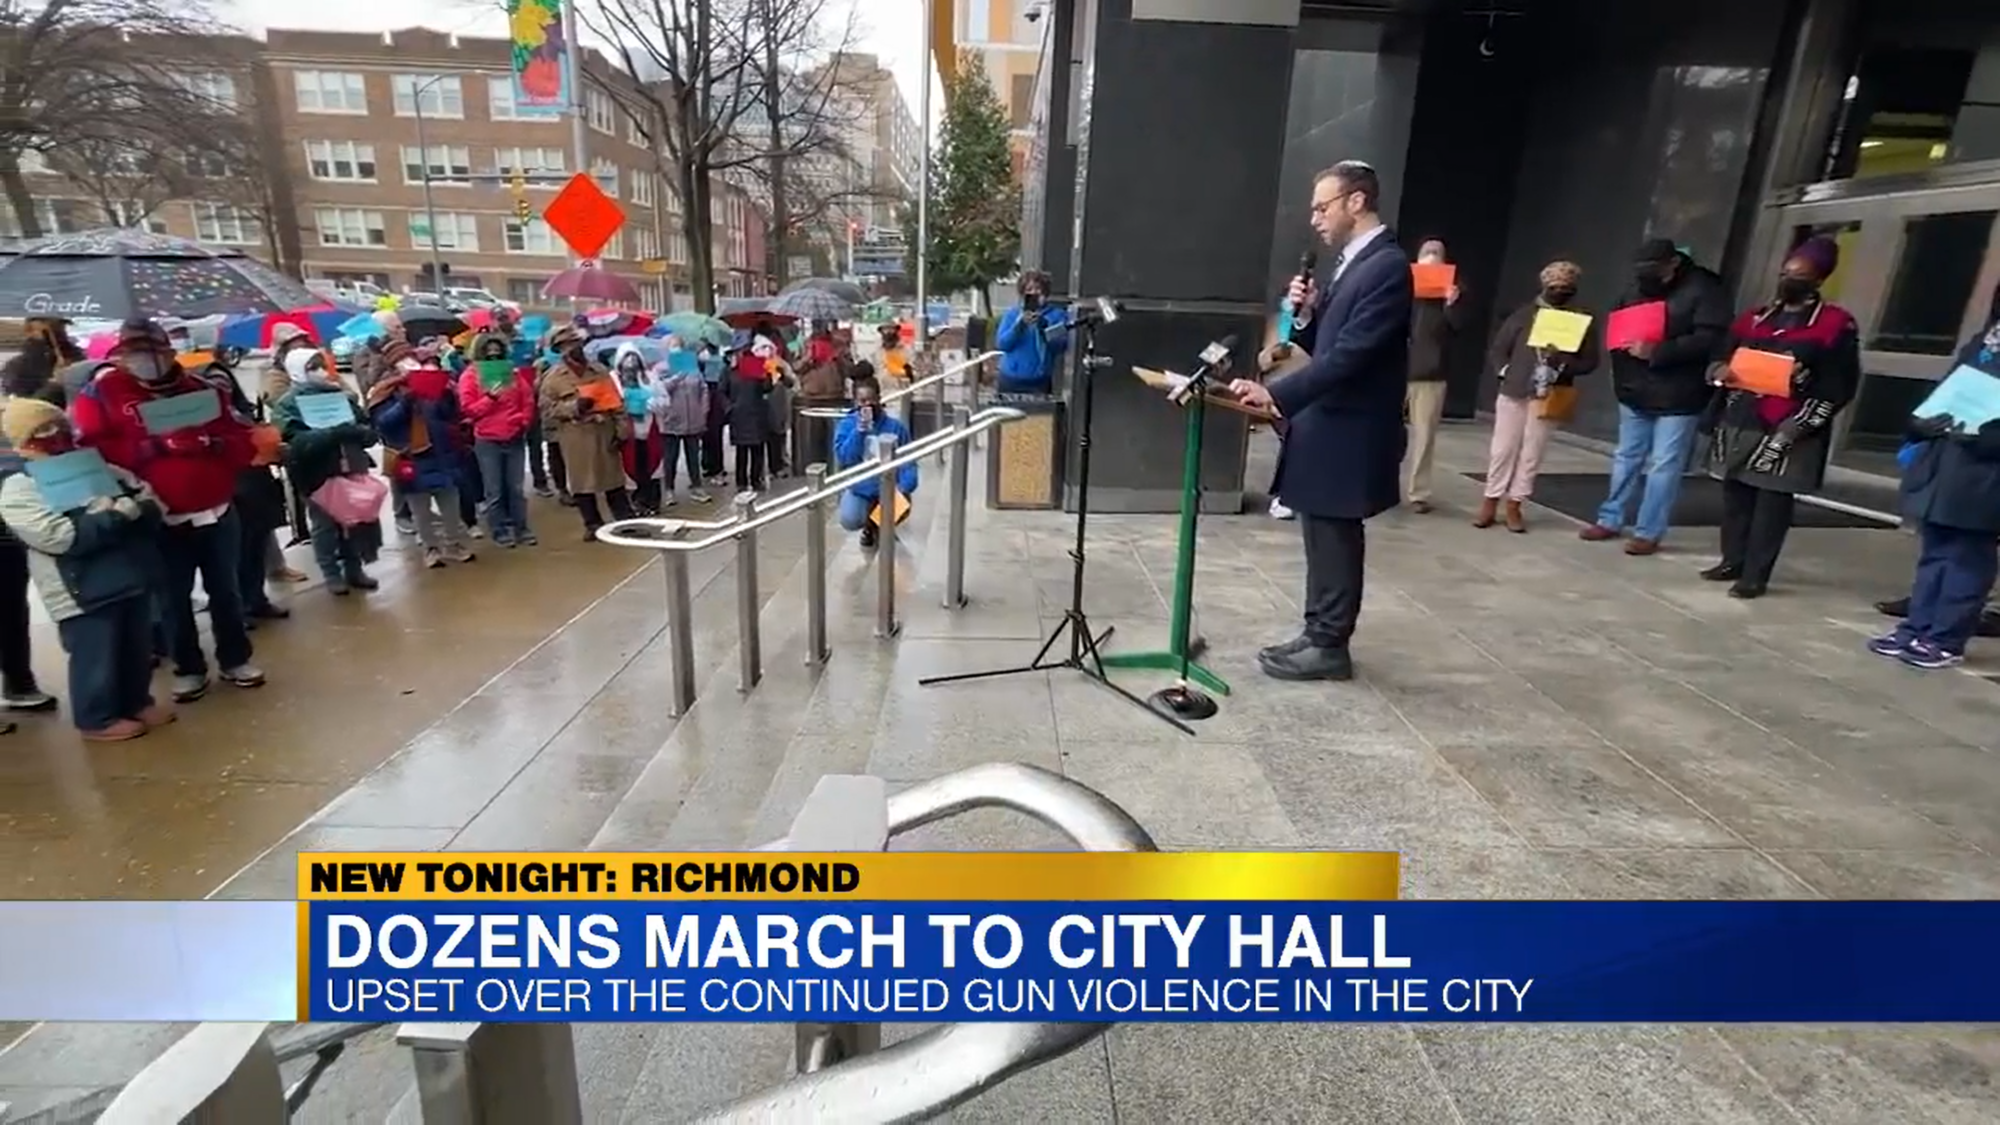 Demonstrators gather at City Hall to demand action on gun violence in Richmond